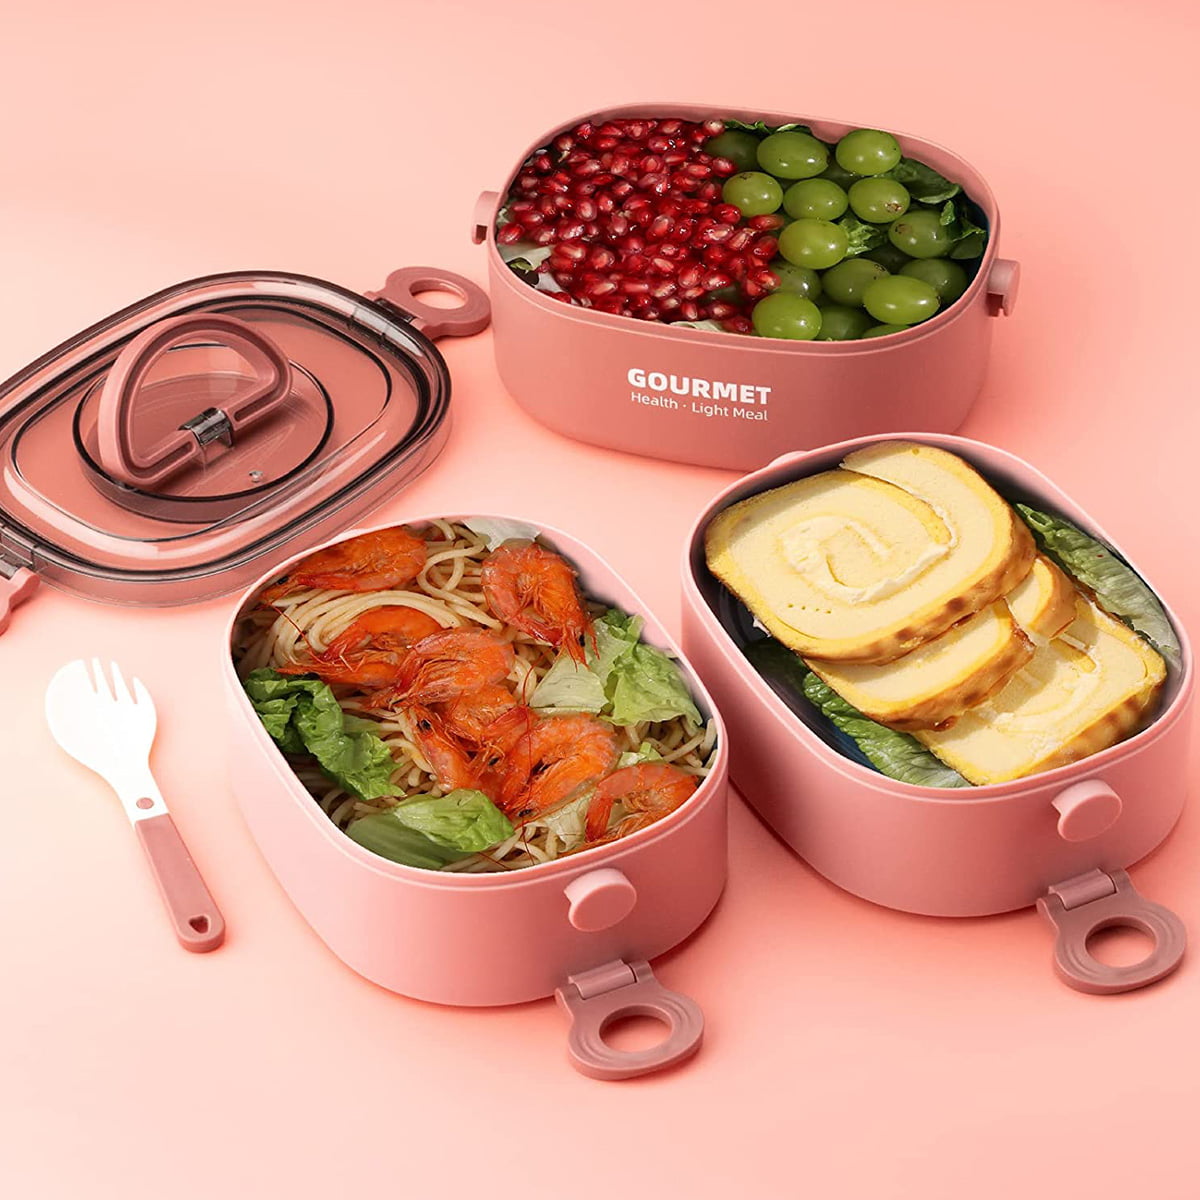 Brighten Your Workday with The HÄMTMAT Tender Sunbeam Bento Lunch Box